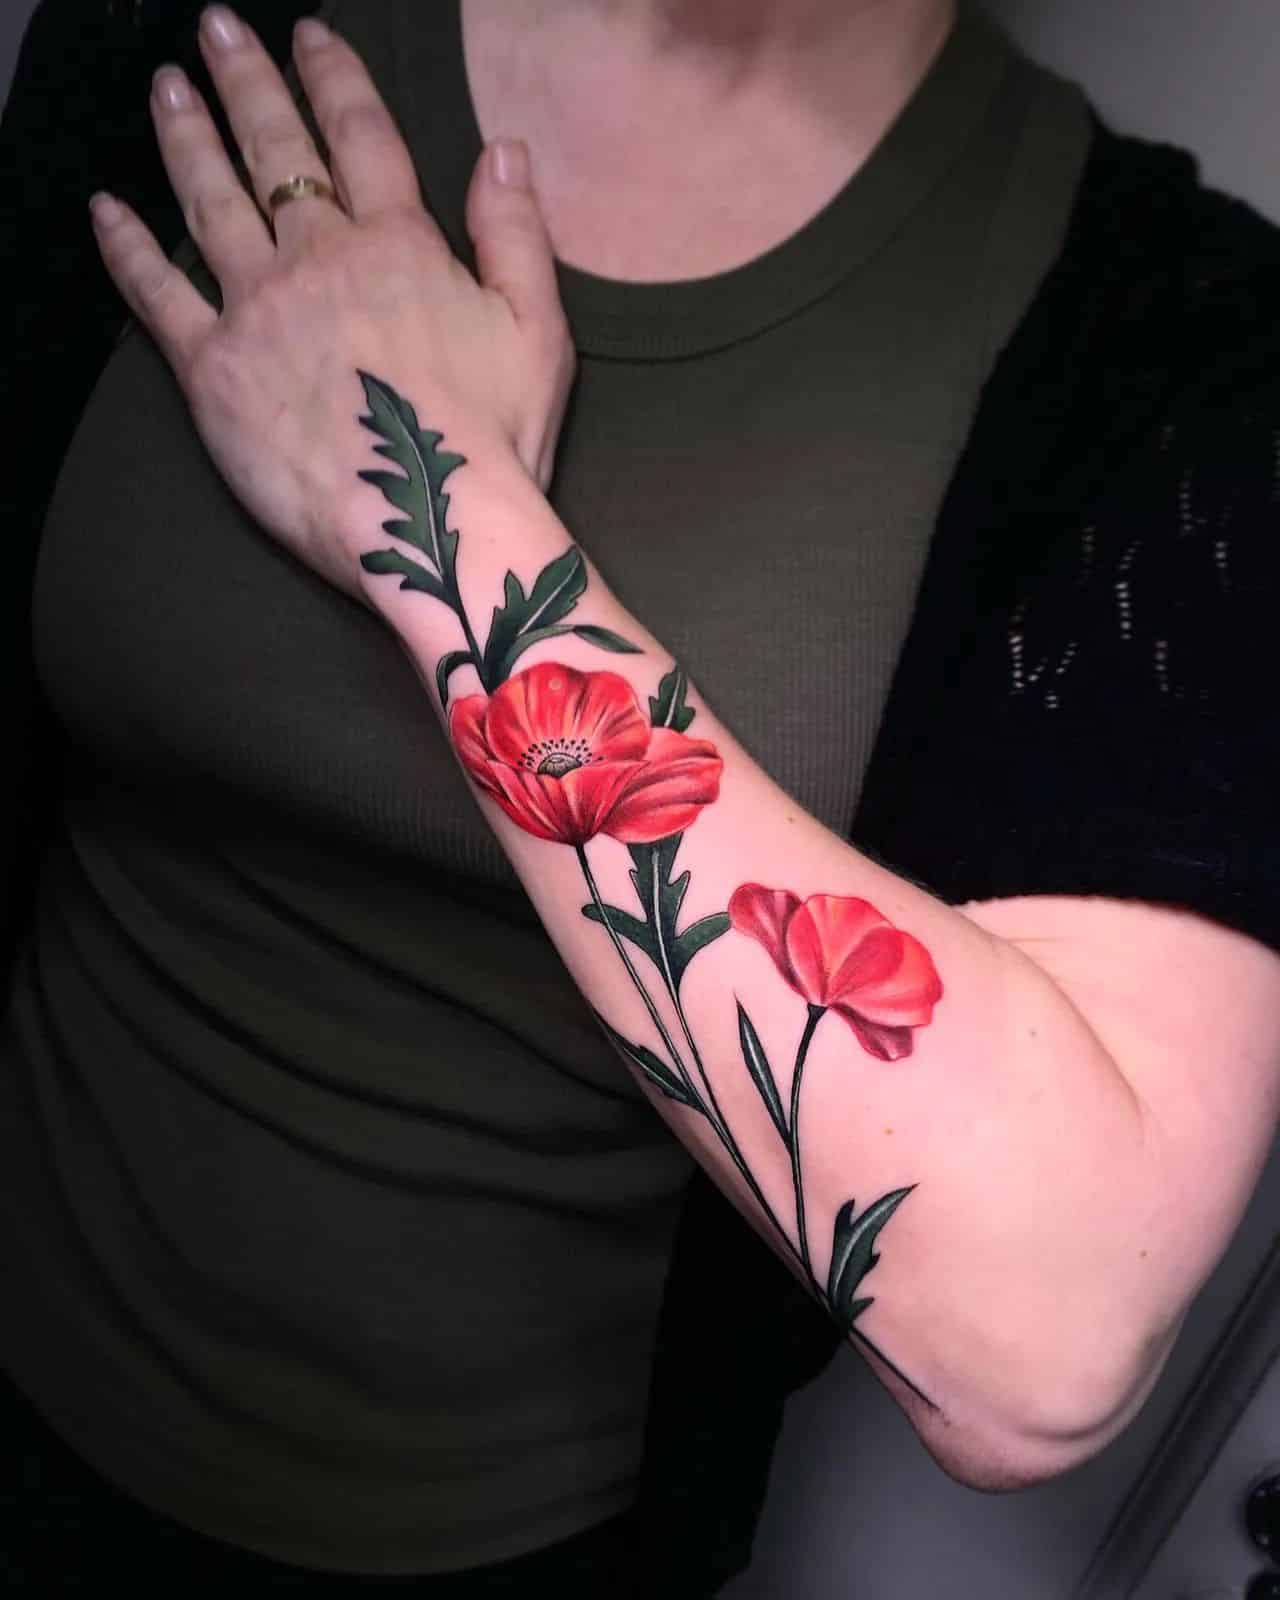 Some Poppies by Noemi done during her recent guest spot in Iceland!
noemi_tattoo 

                        